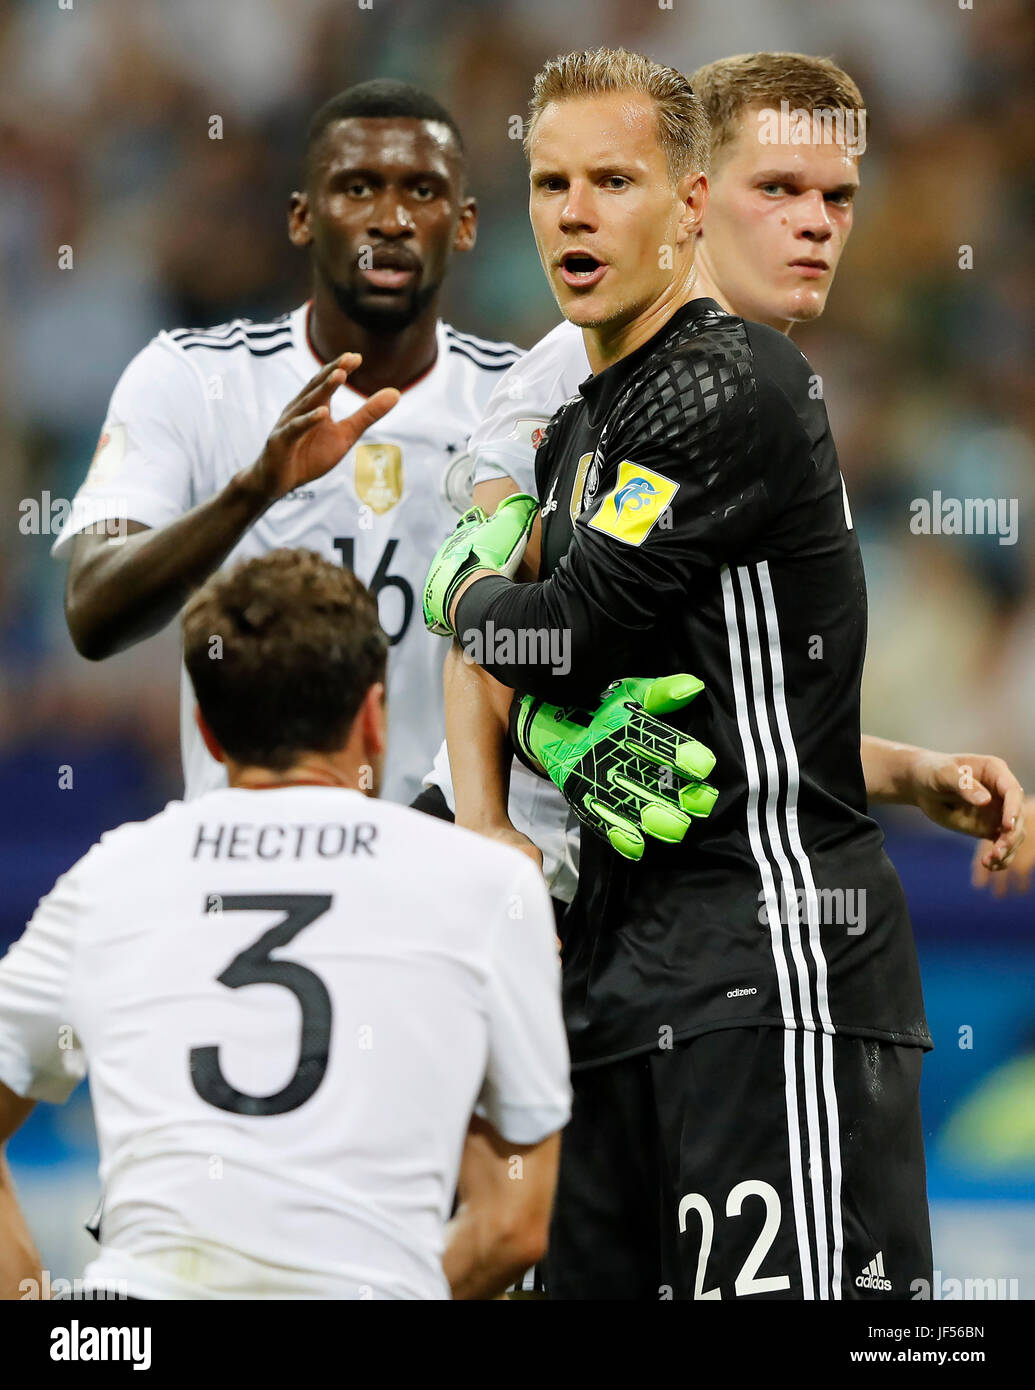 SOCHI, SC - 29.06.2017: GERMANY VS MEXICO - Jonas HECTOR, Marc-Andre TER STEGEN, Antonio RUEDIGER and Matthias GINTER from Germany during a match between Germany and Mexico in the semifinals of the 2017 FIFA Confederations Cup on Thursday at the Sochi Olympic Stadium in Sochi. Russia. (Photo: Rodolfo Buhrer/La Imagem/Fotoarena) Stock Photo